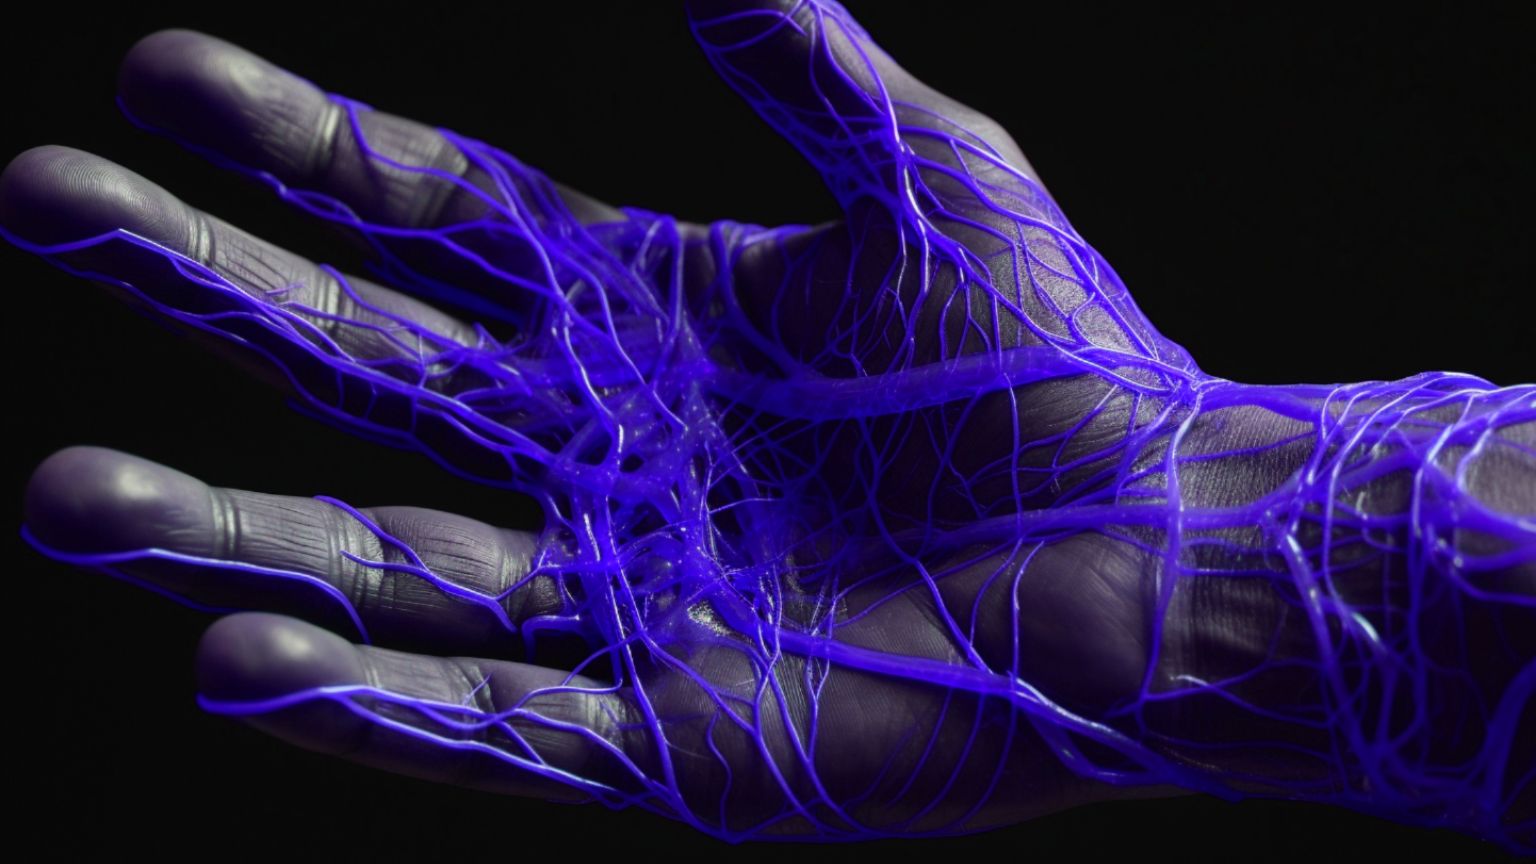 The Veins In Your Hand Are The Next Dystopian Target For Biometric ID Scanning